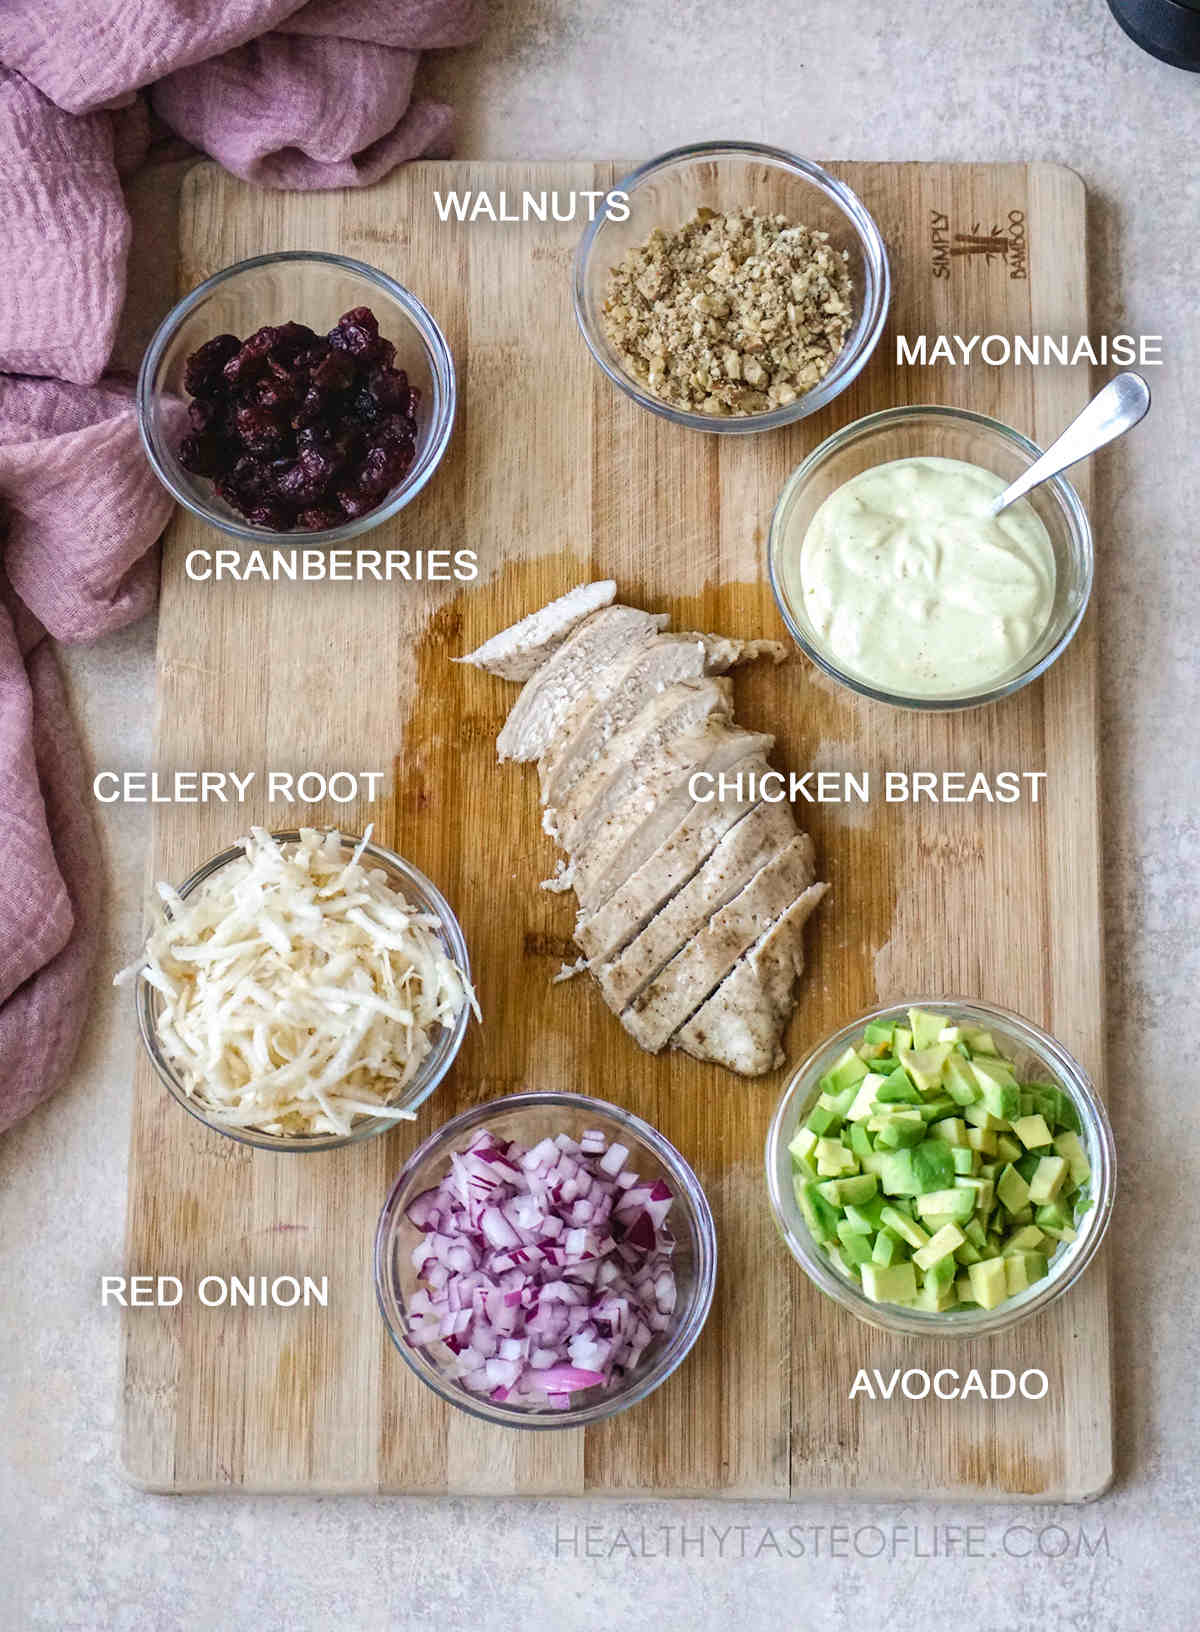 Ingredients for this cranberry walnut chicken salad - measured and displayed on a board: Chopped cooked chicken breast, walnuts, dried cranberries, onion, celery root, avocado and mayo.